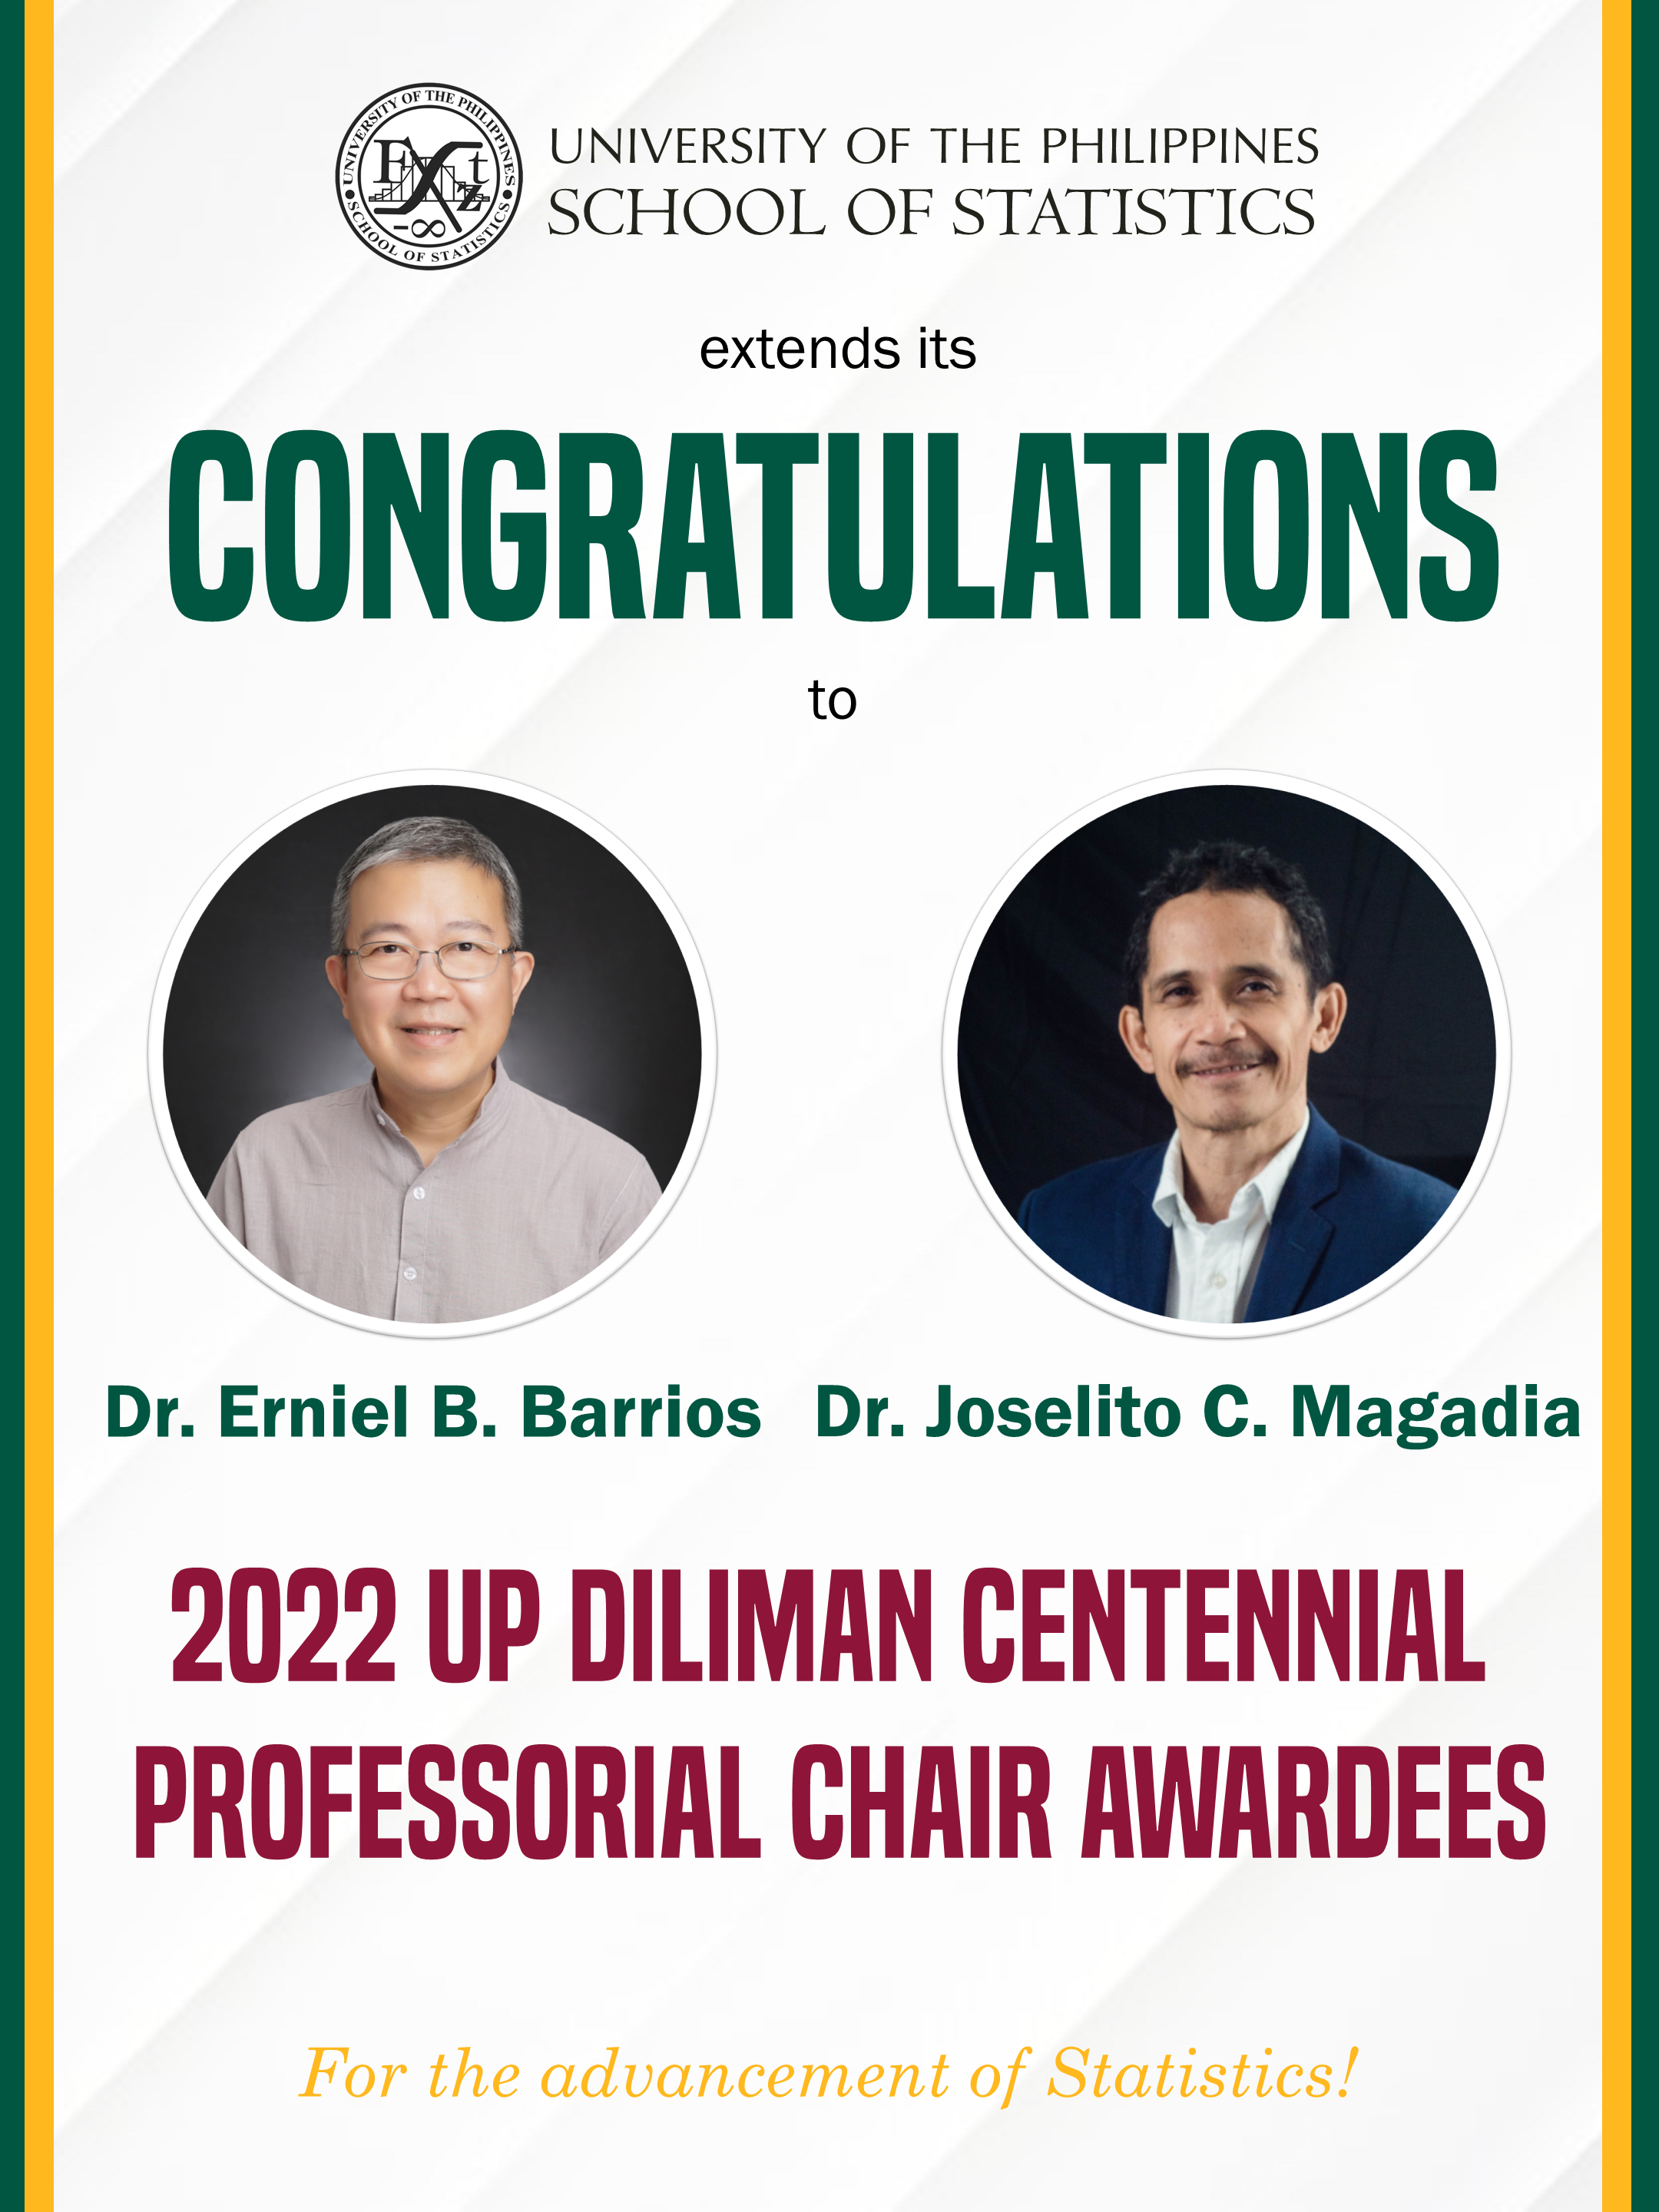 Image for CONGRATULATIONS to the 2022 UP DILIMAN CENTENNIAL PROFESSORIAL CHAIR AWARDEES